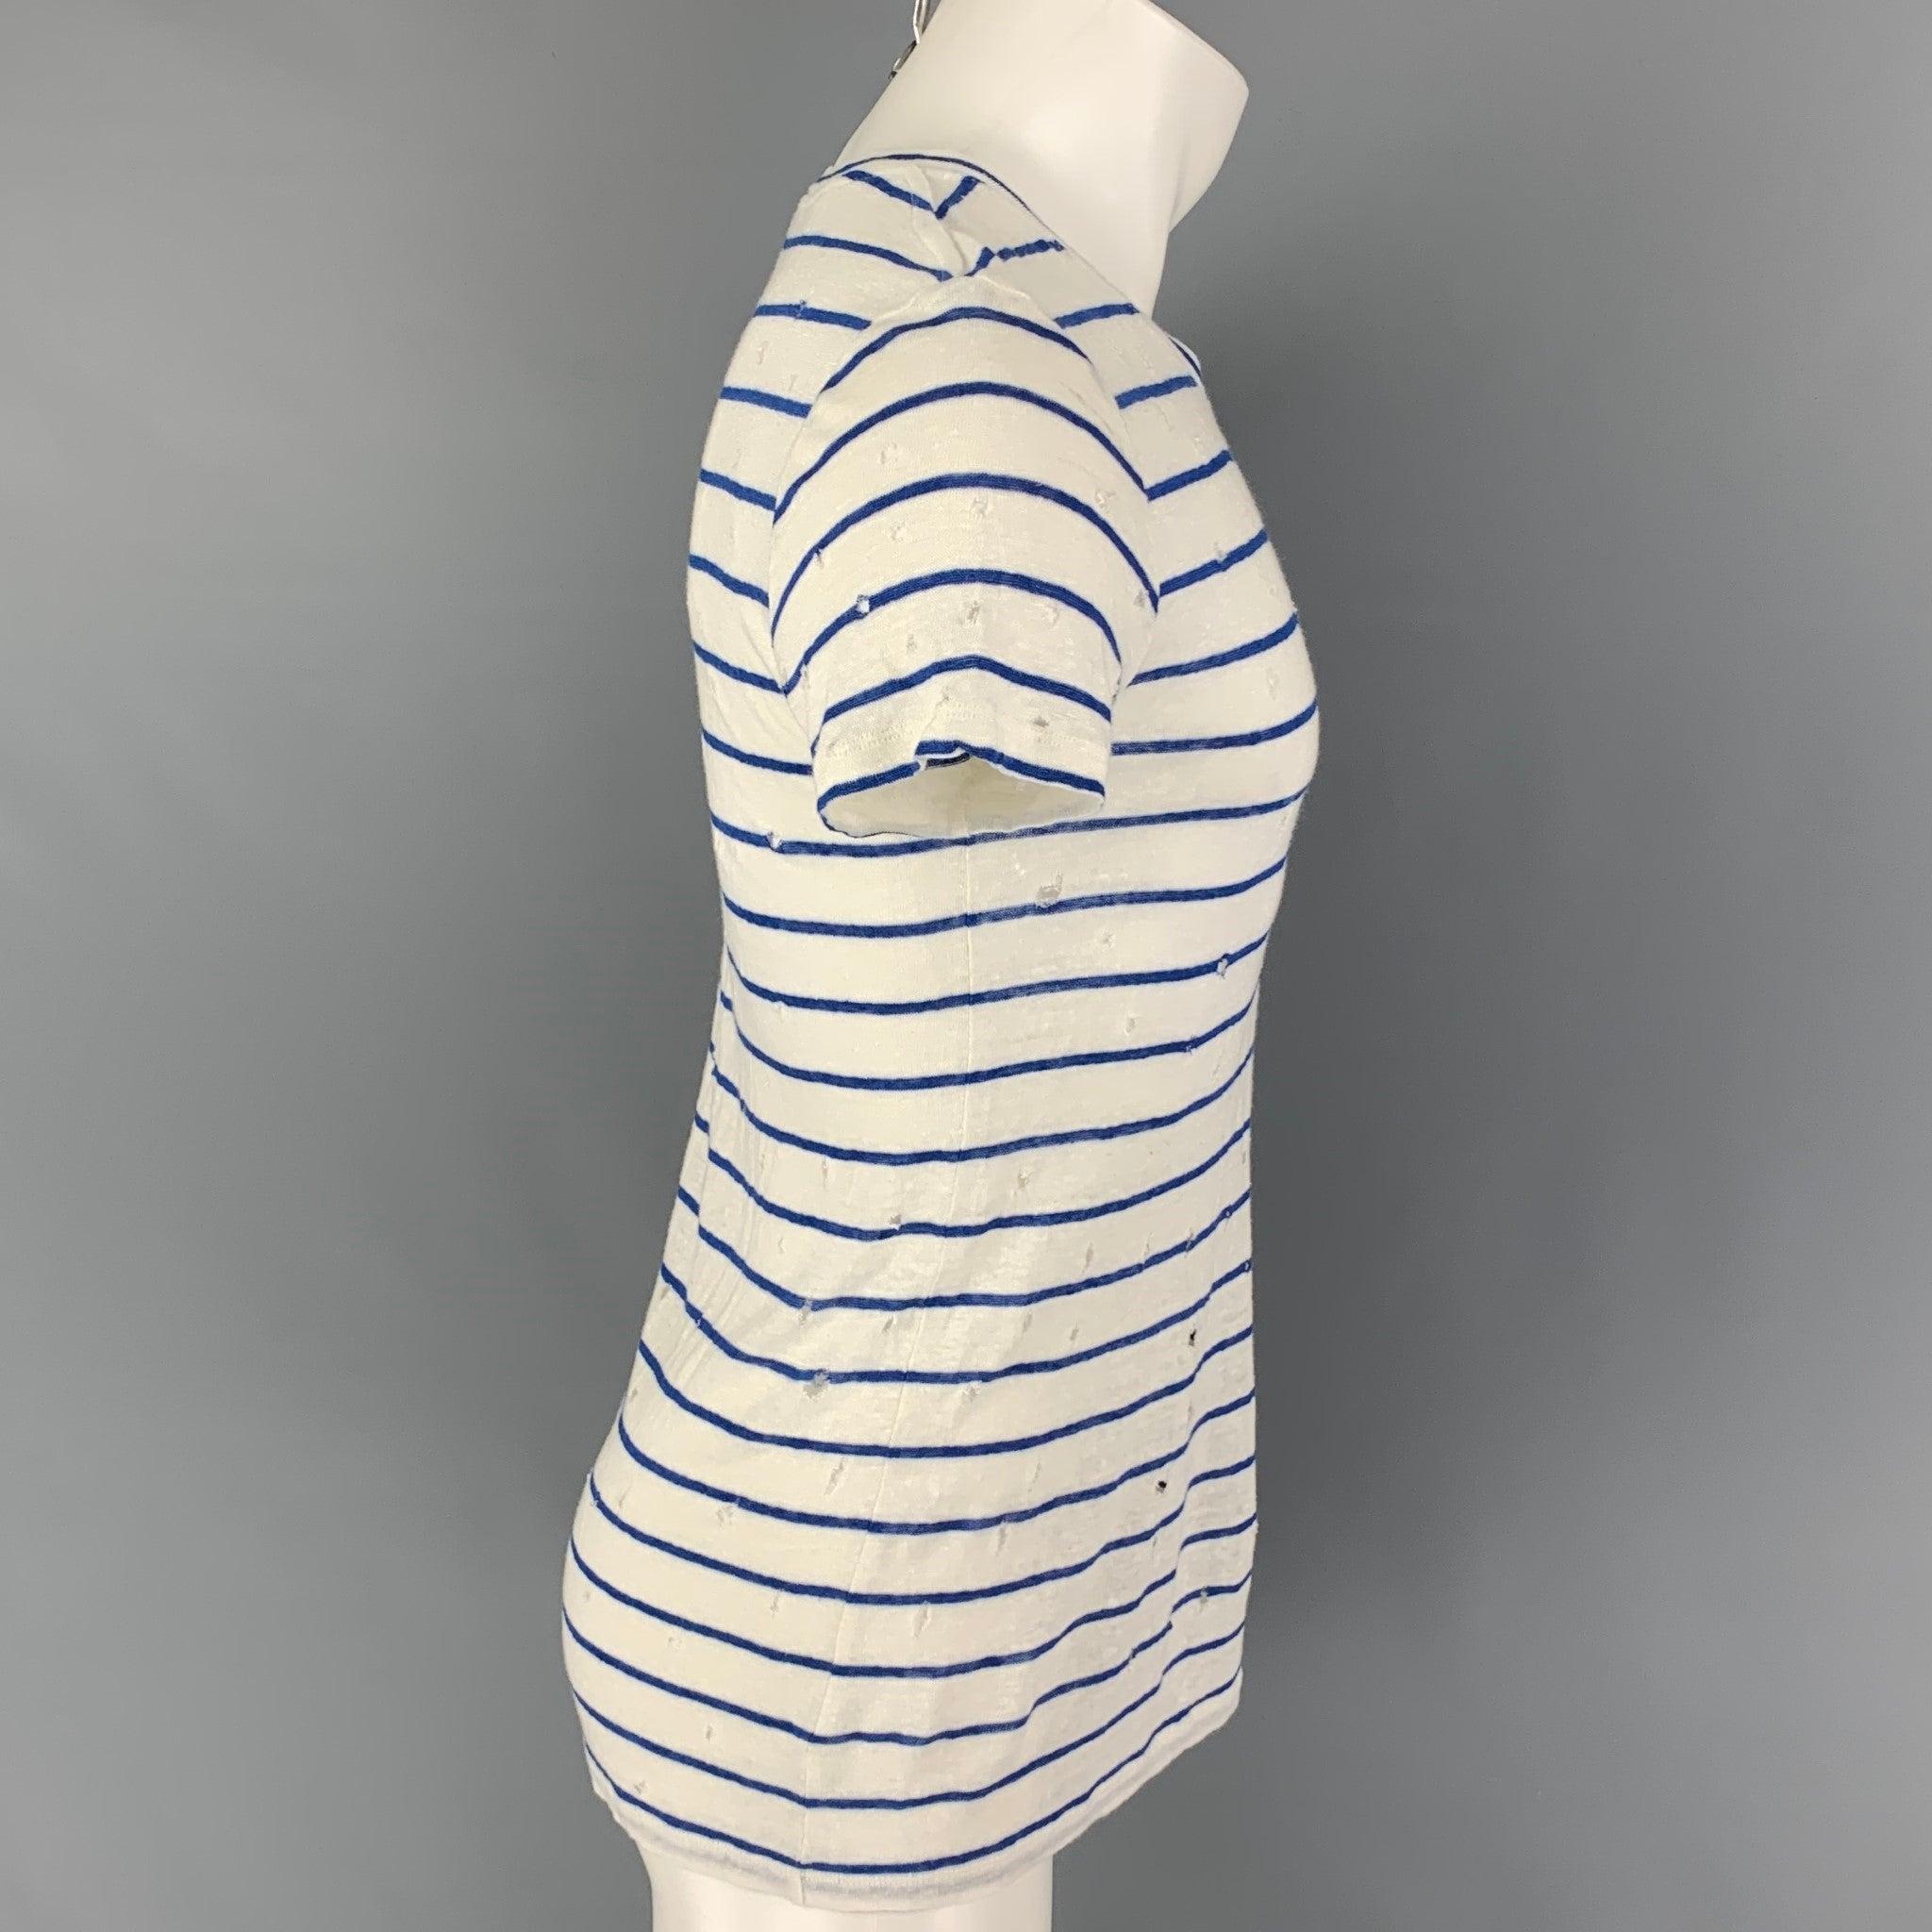 IRO 'Mina' t-shirt comes in a white & blue linen featuring distressed details throughout and a crew-neck. Made in Portugal.
Very Good Pre-Owned Condition.  

Marked:   XS 

Measurements: 
 
Shoulder:
16.5 inches  Chest: 34 inches  Sleeve: 7 inches